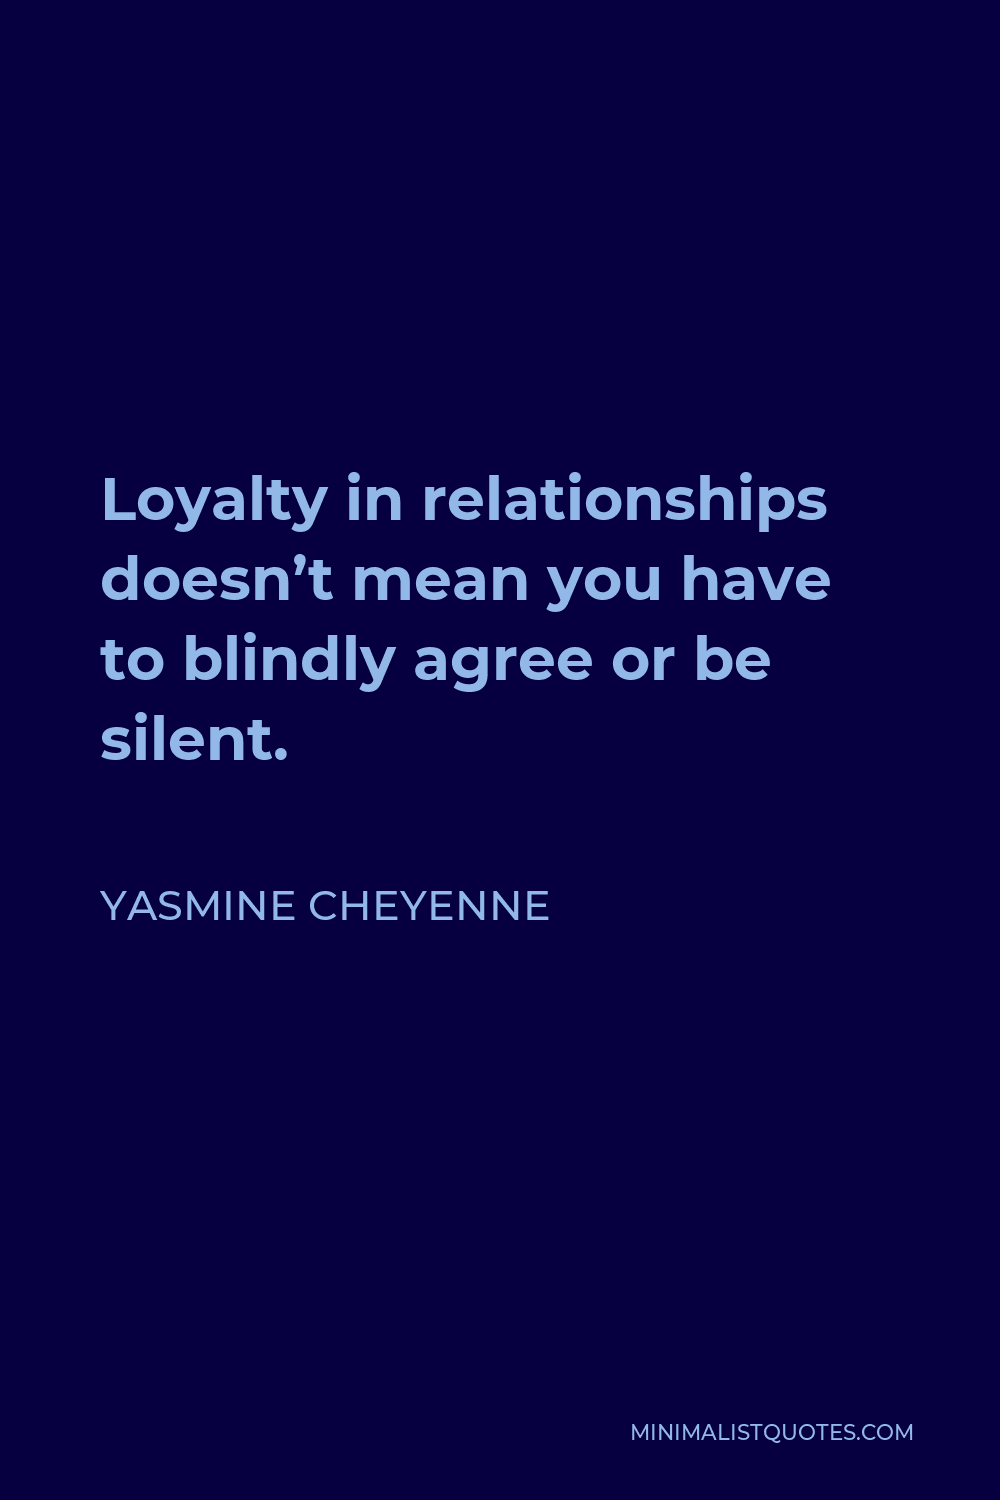 Yasmine Cheyenne Quote - Loyalty in relationships doesn’t mean you have to blindly agree or be silent.